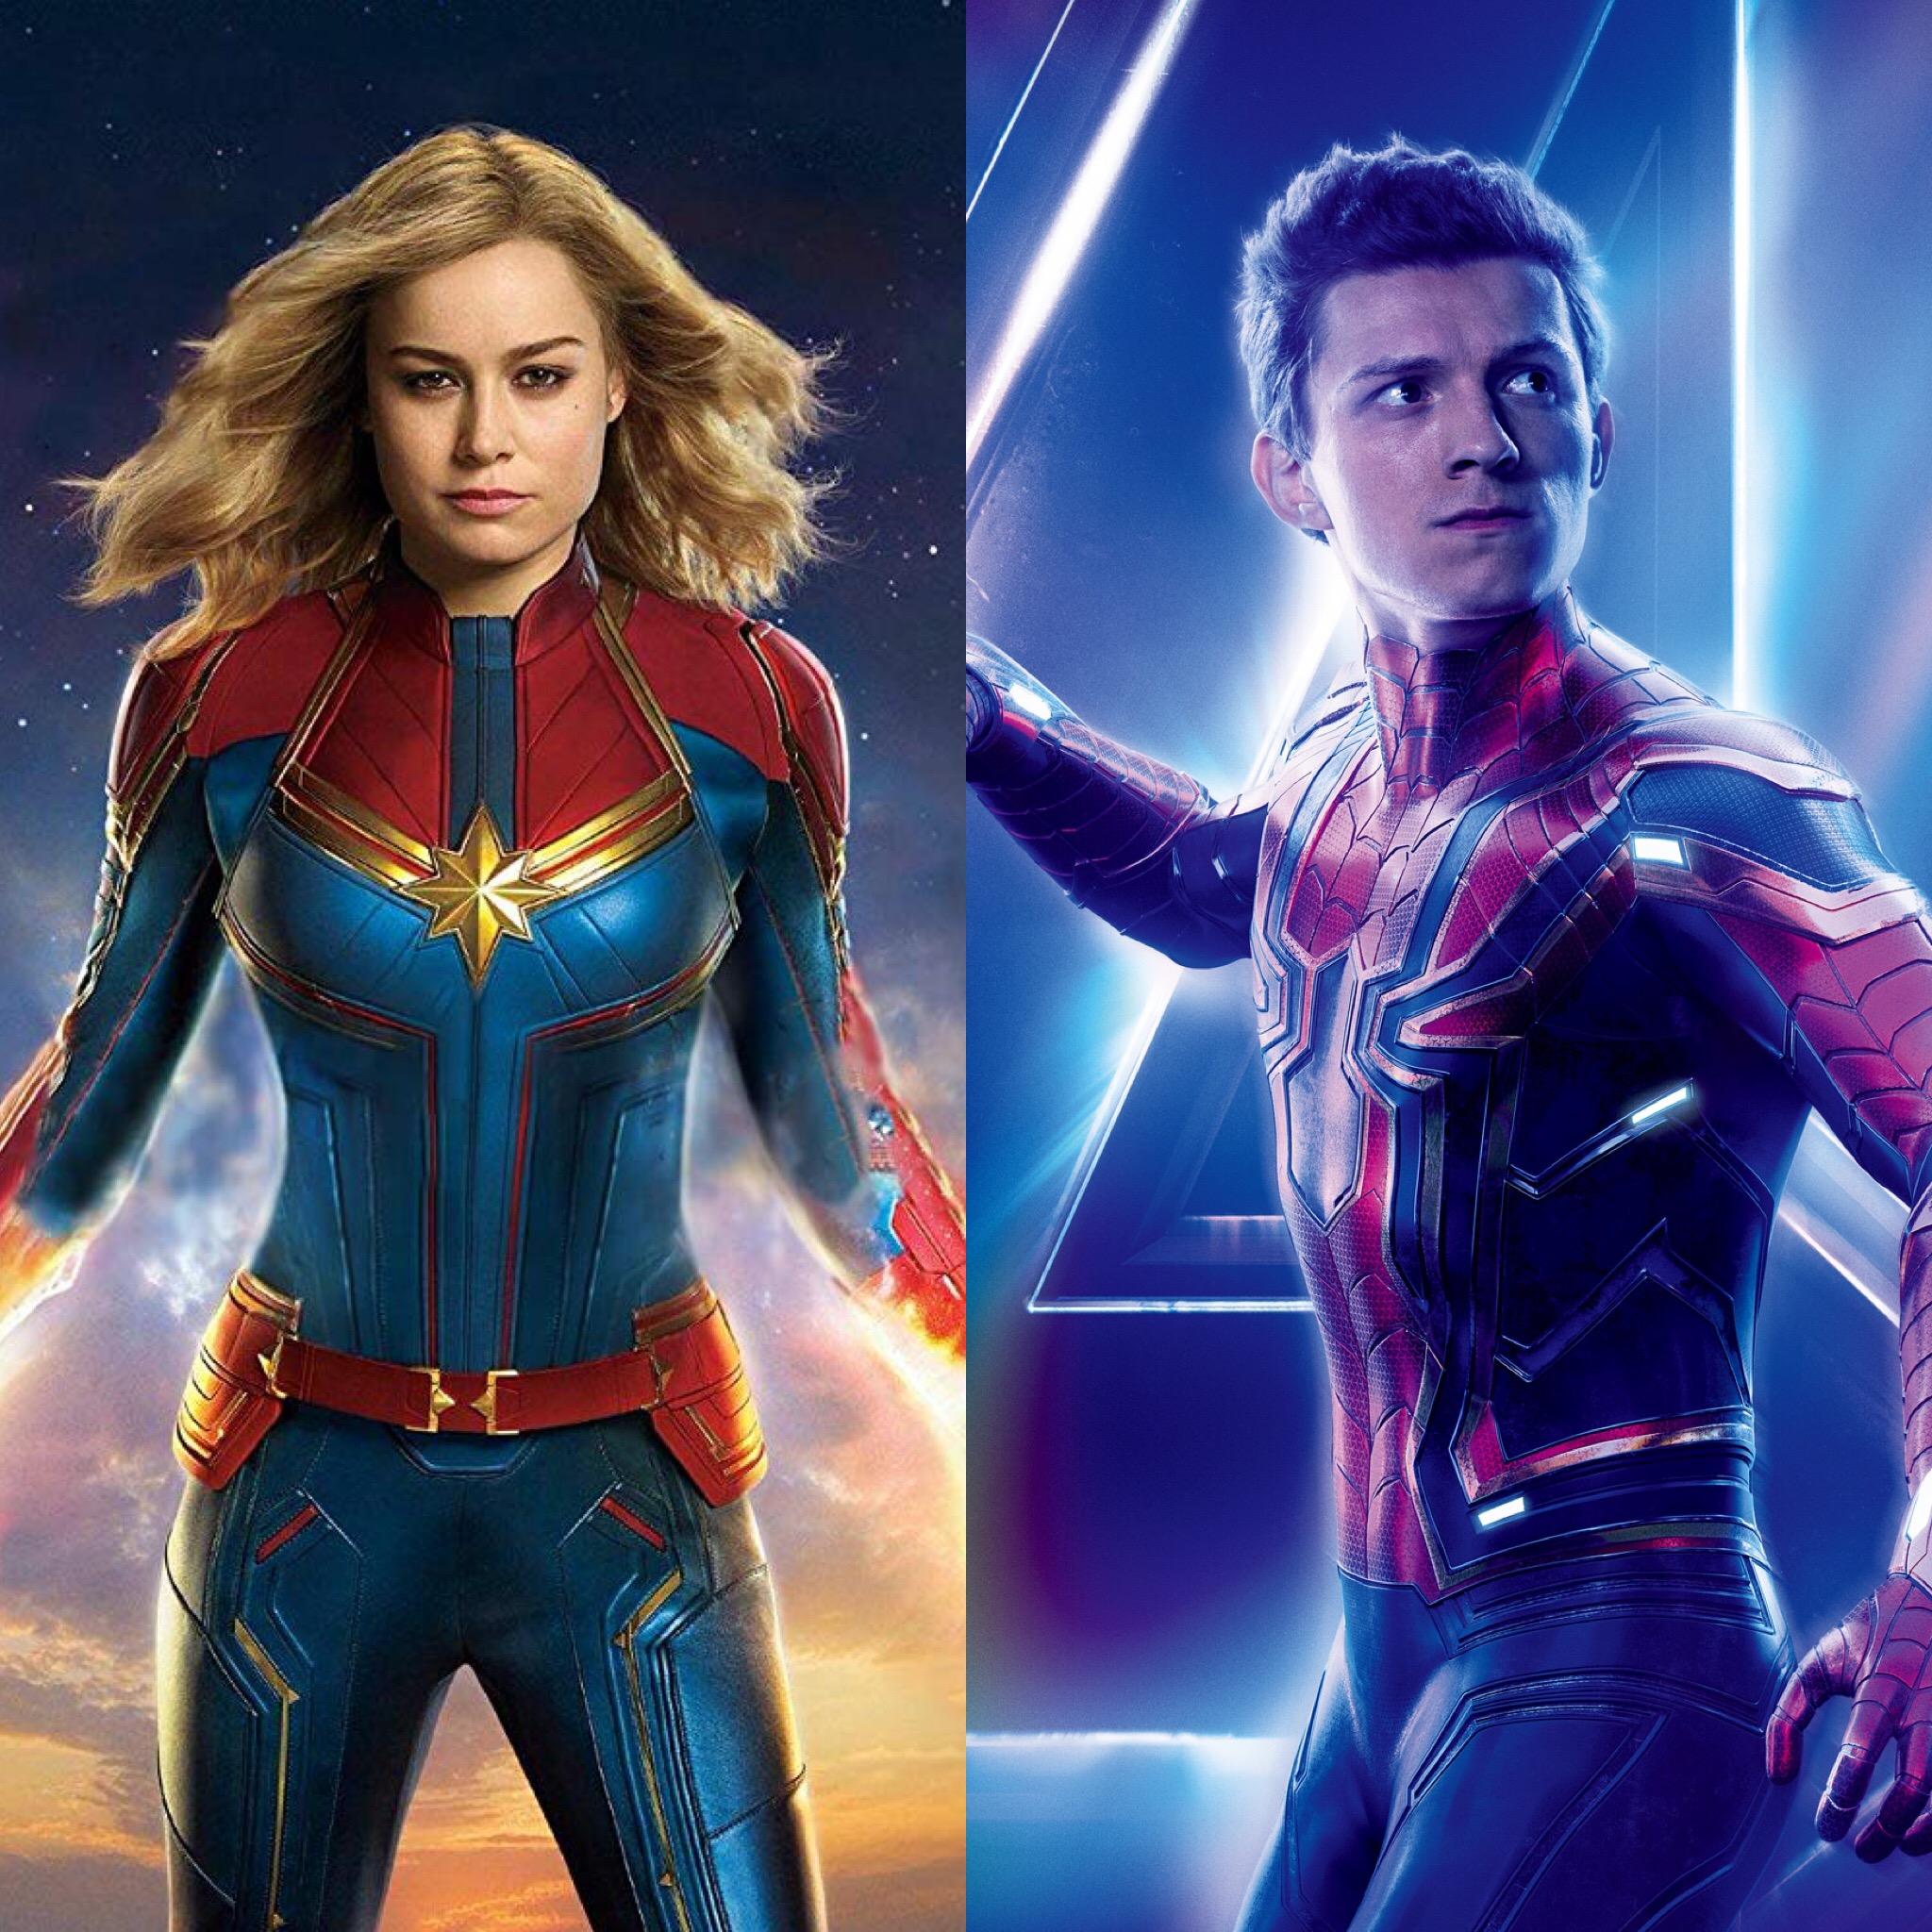 Did Captain Marvel Just Get Her MCU Name From… Peter Parker?